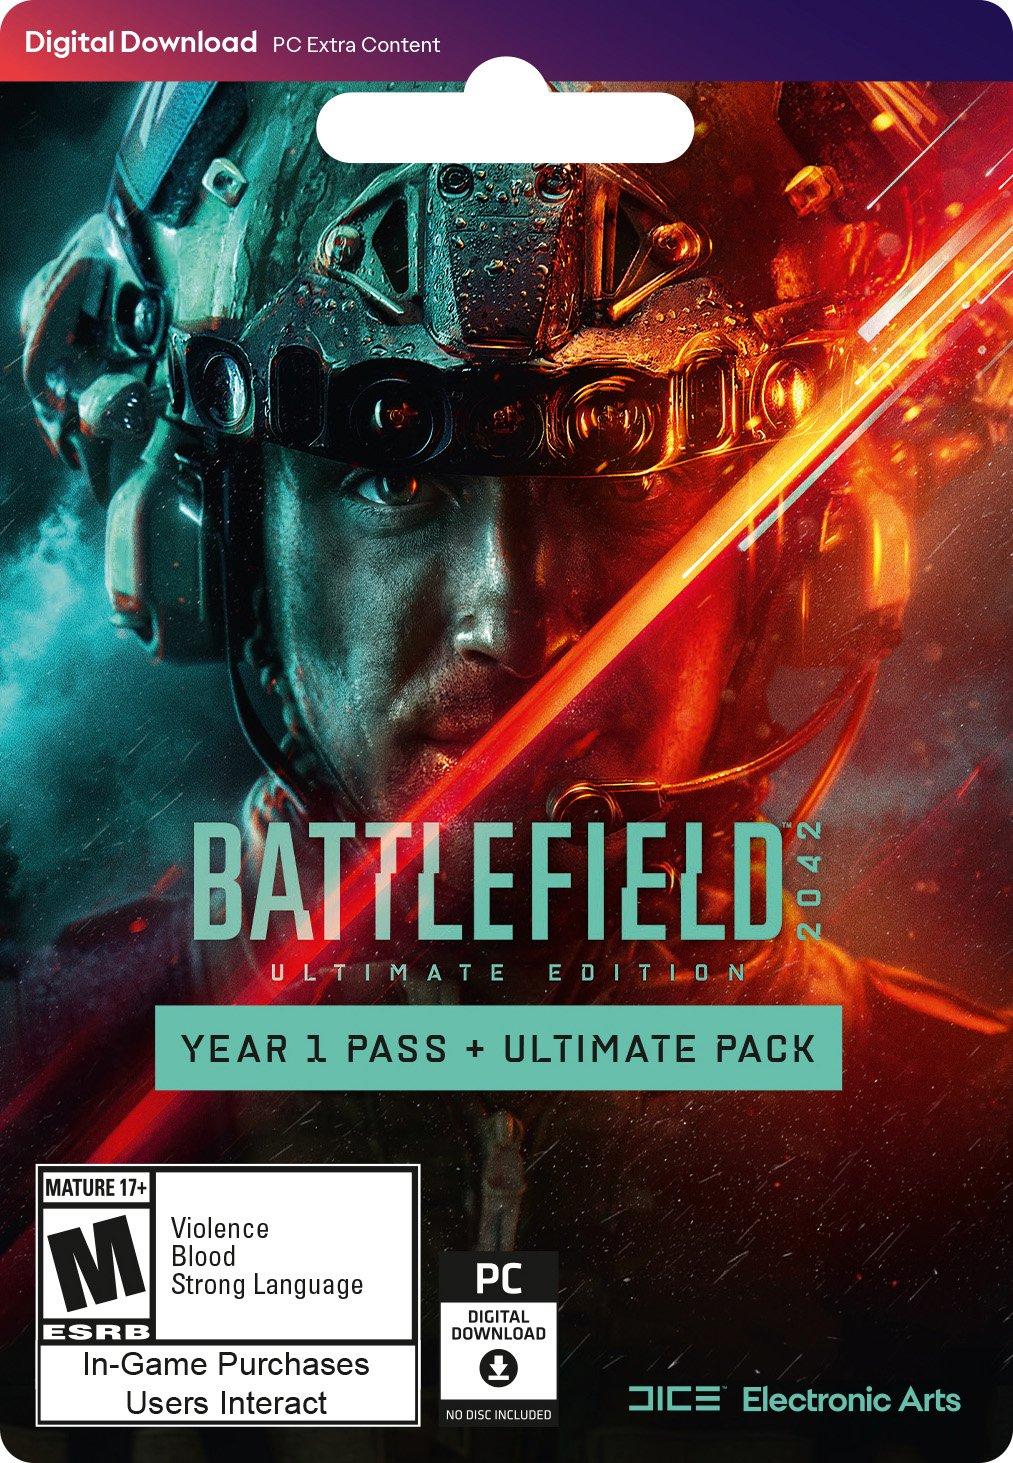 Electronic Arts Battlefield 2042 Year 1 Pass x Ultimate Pack Ultimate Edition - PC Origin